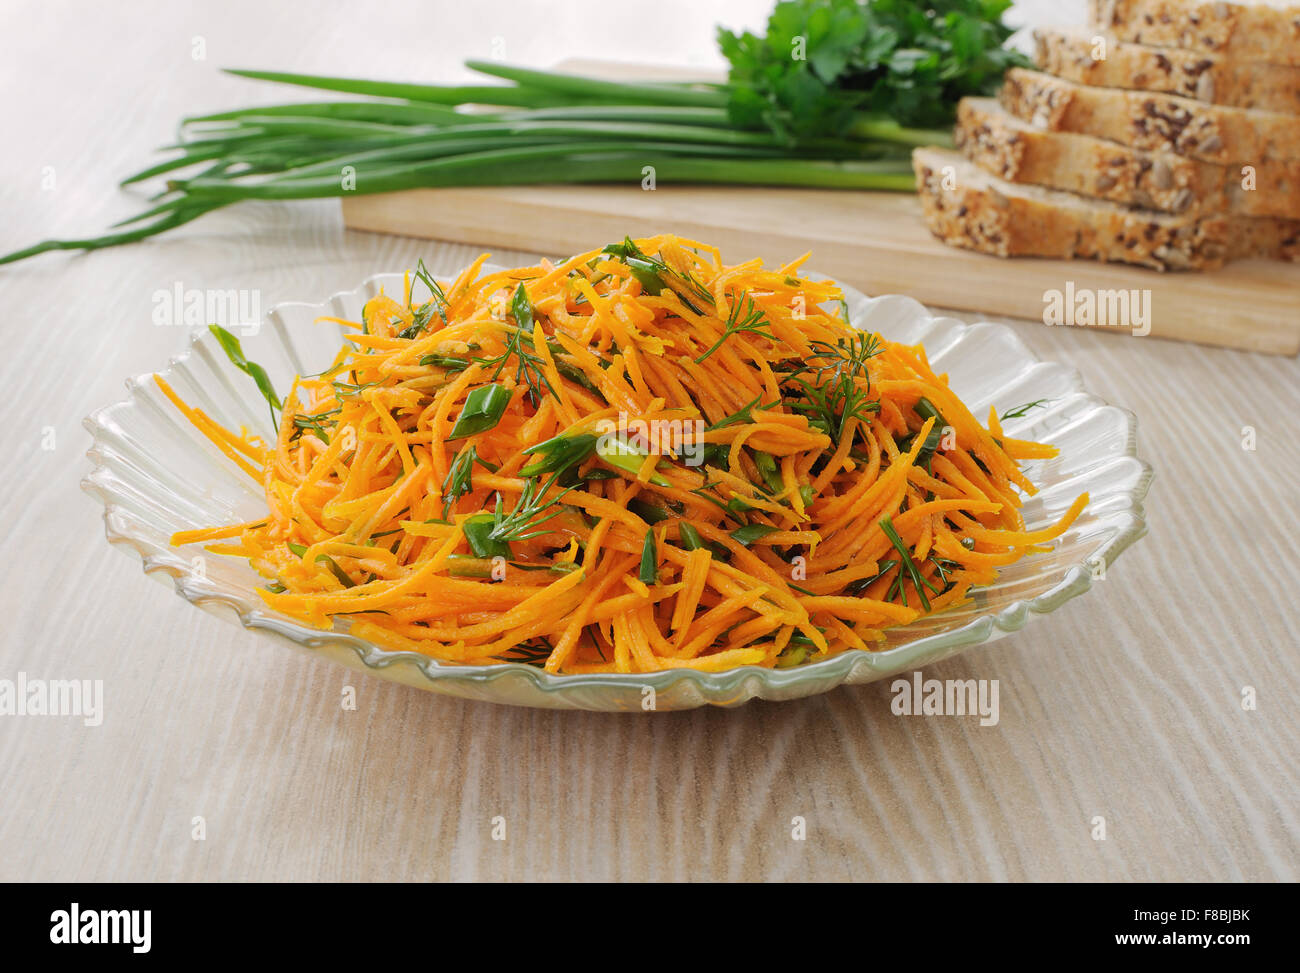 Carrot salad with green onion and dill Stock Photo